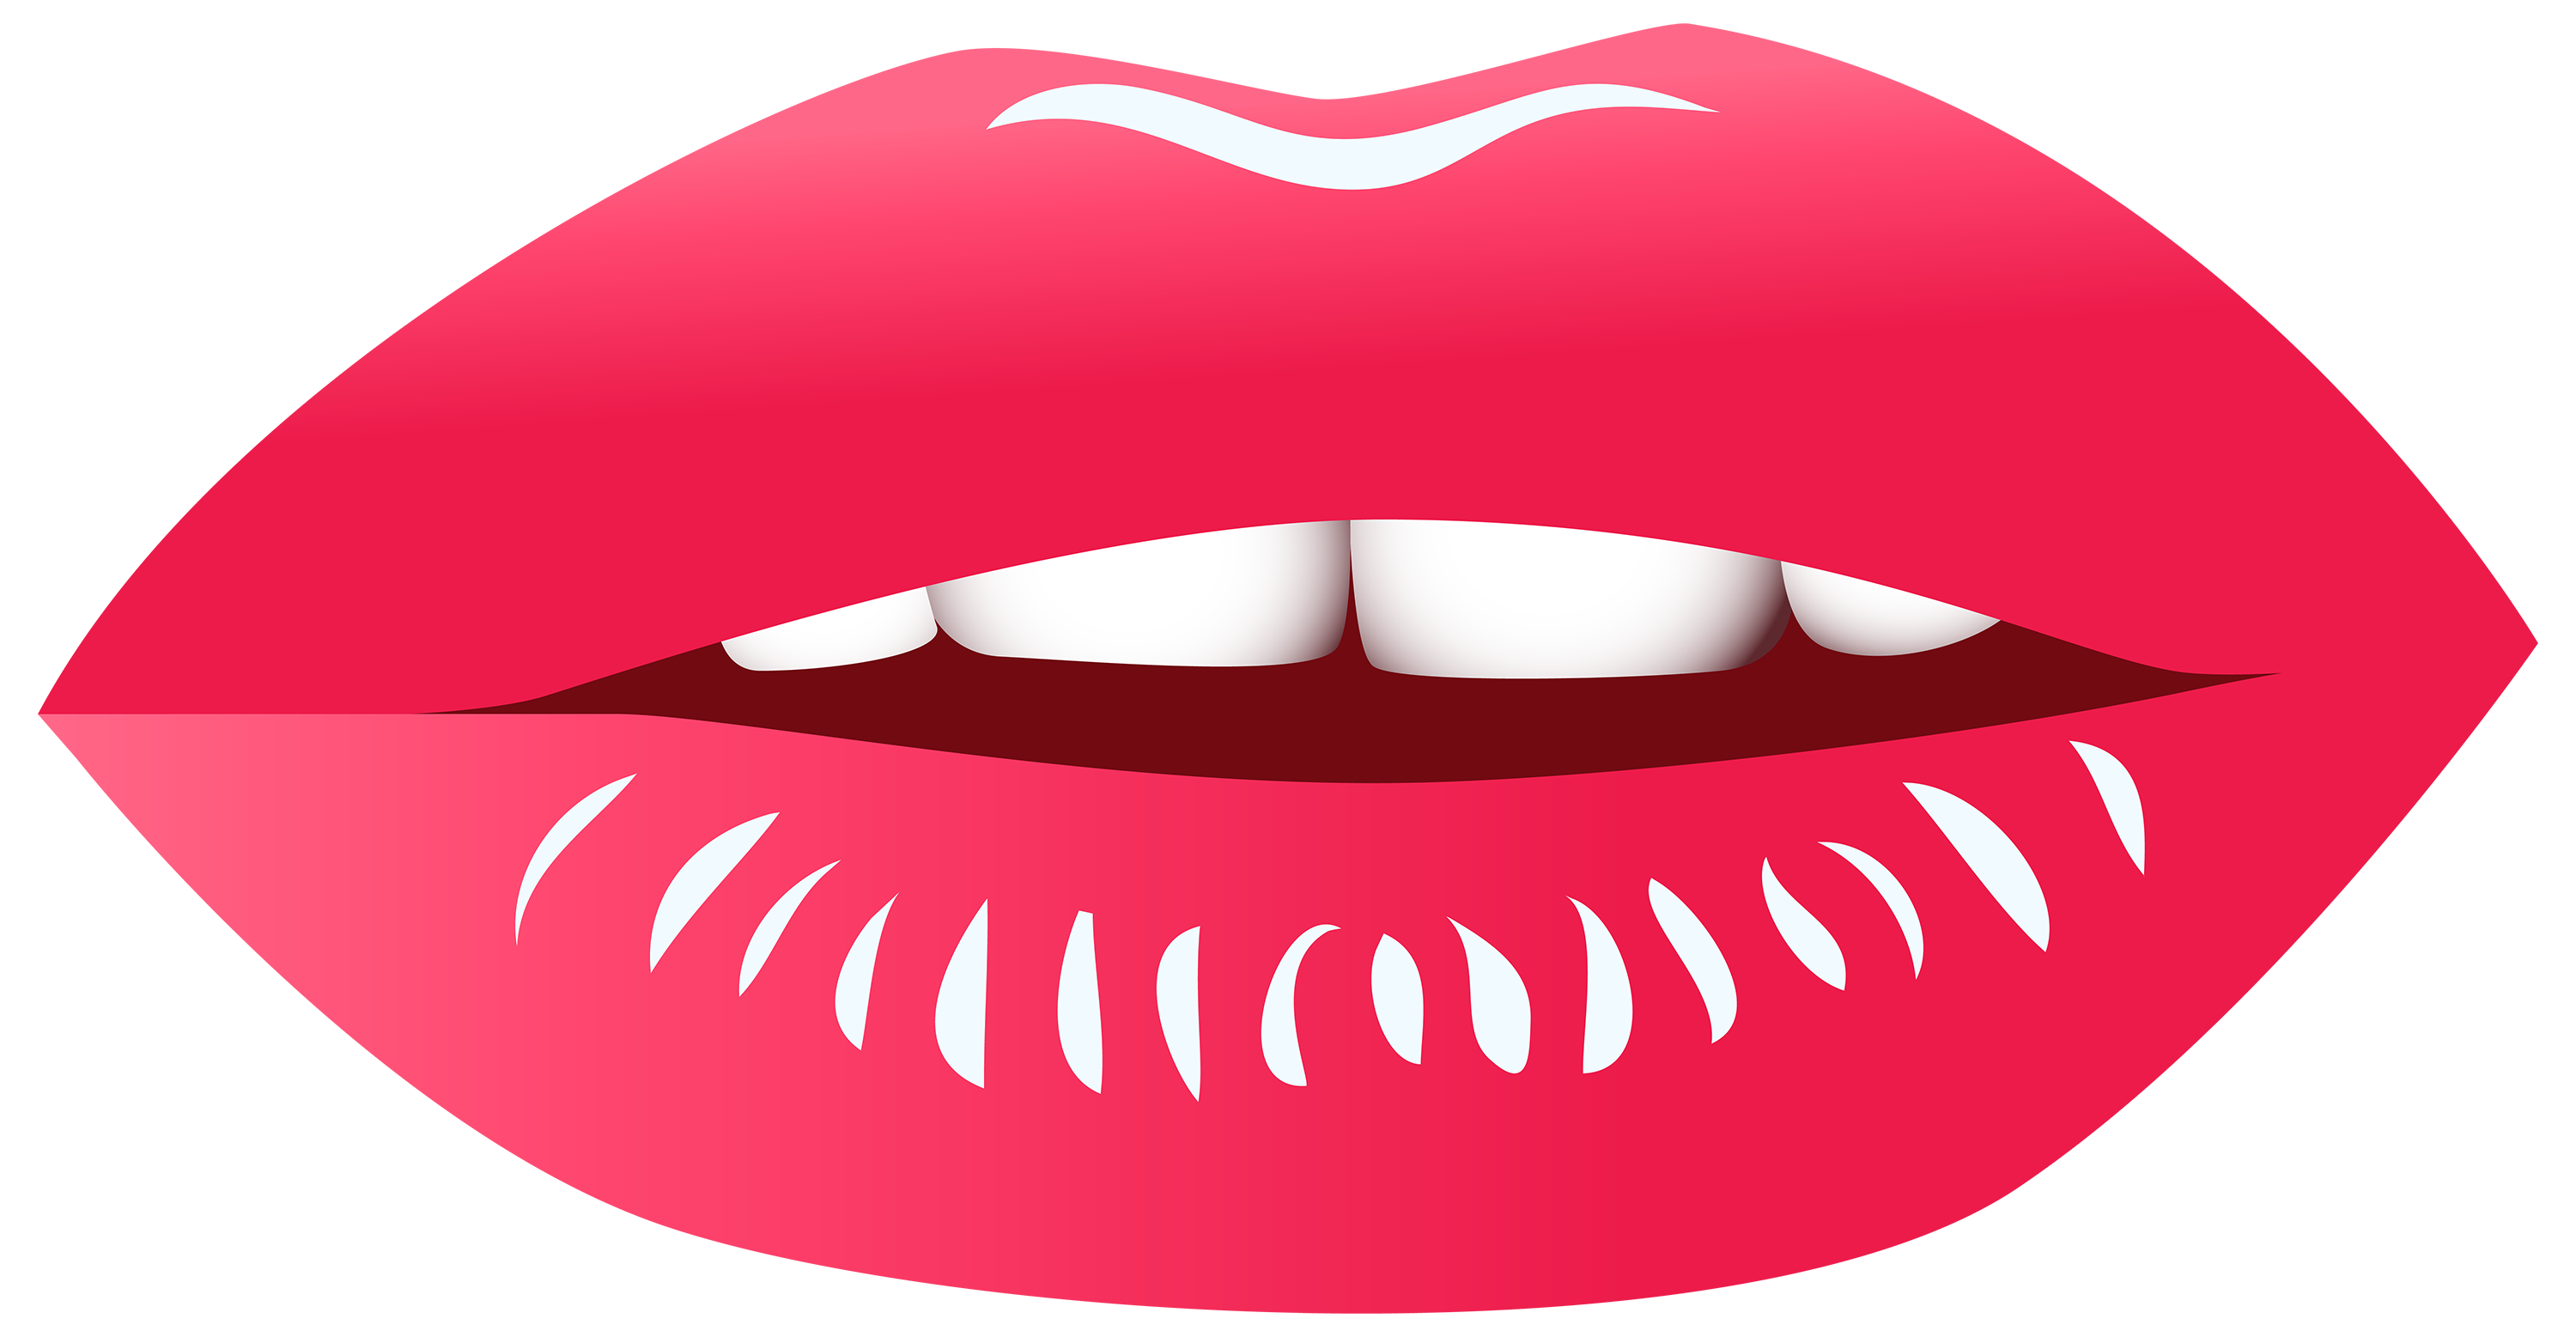 Mouth clip art free clipart images 3